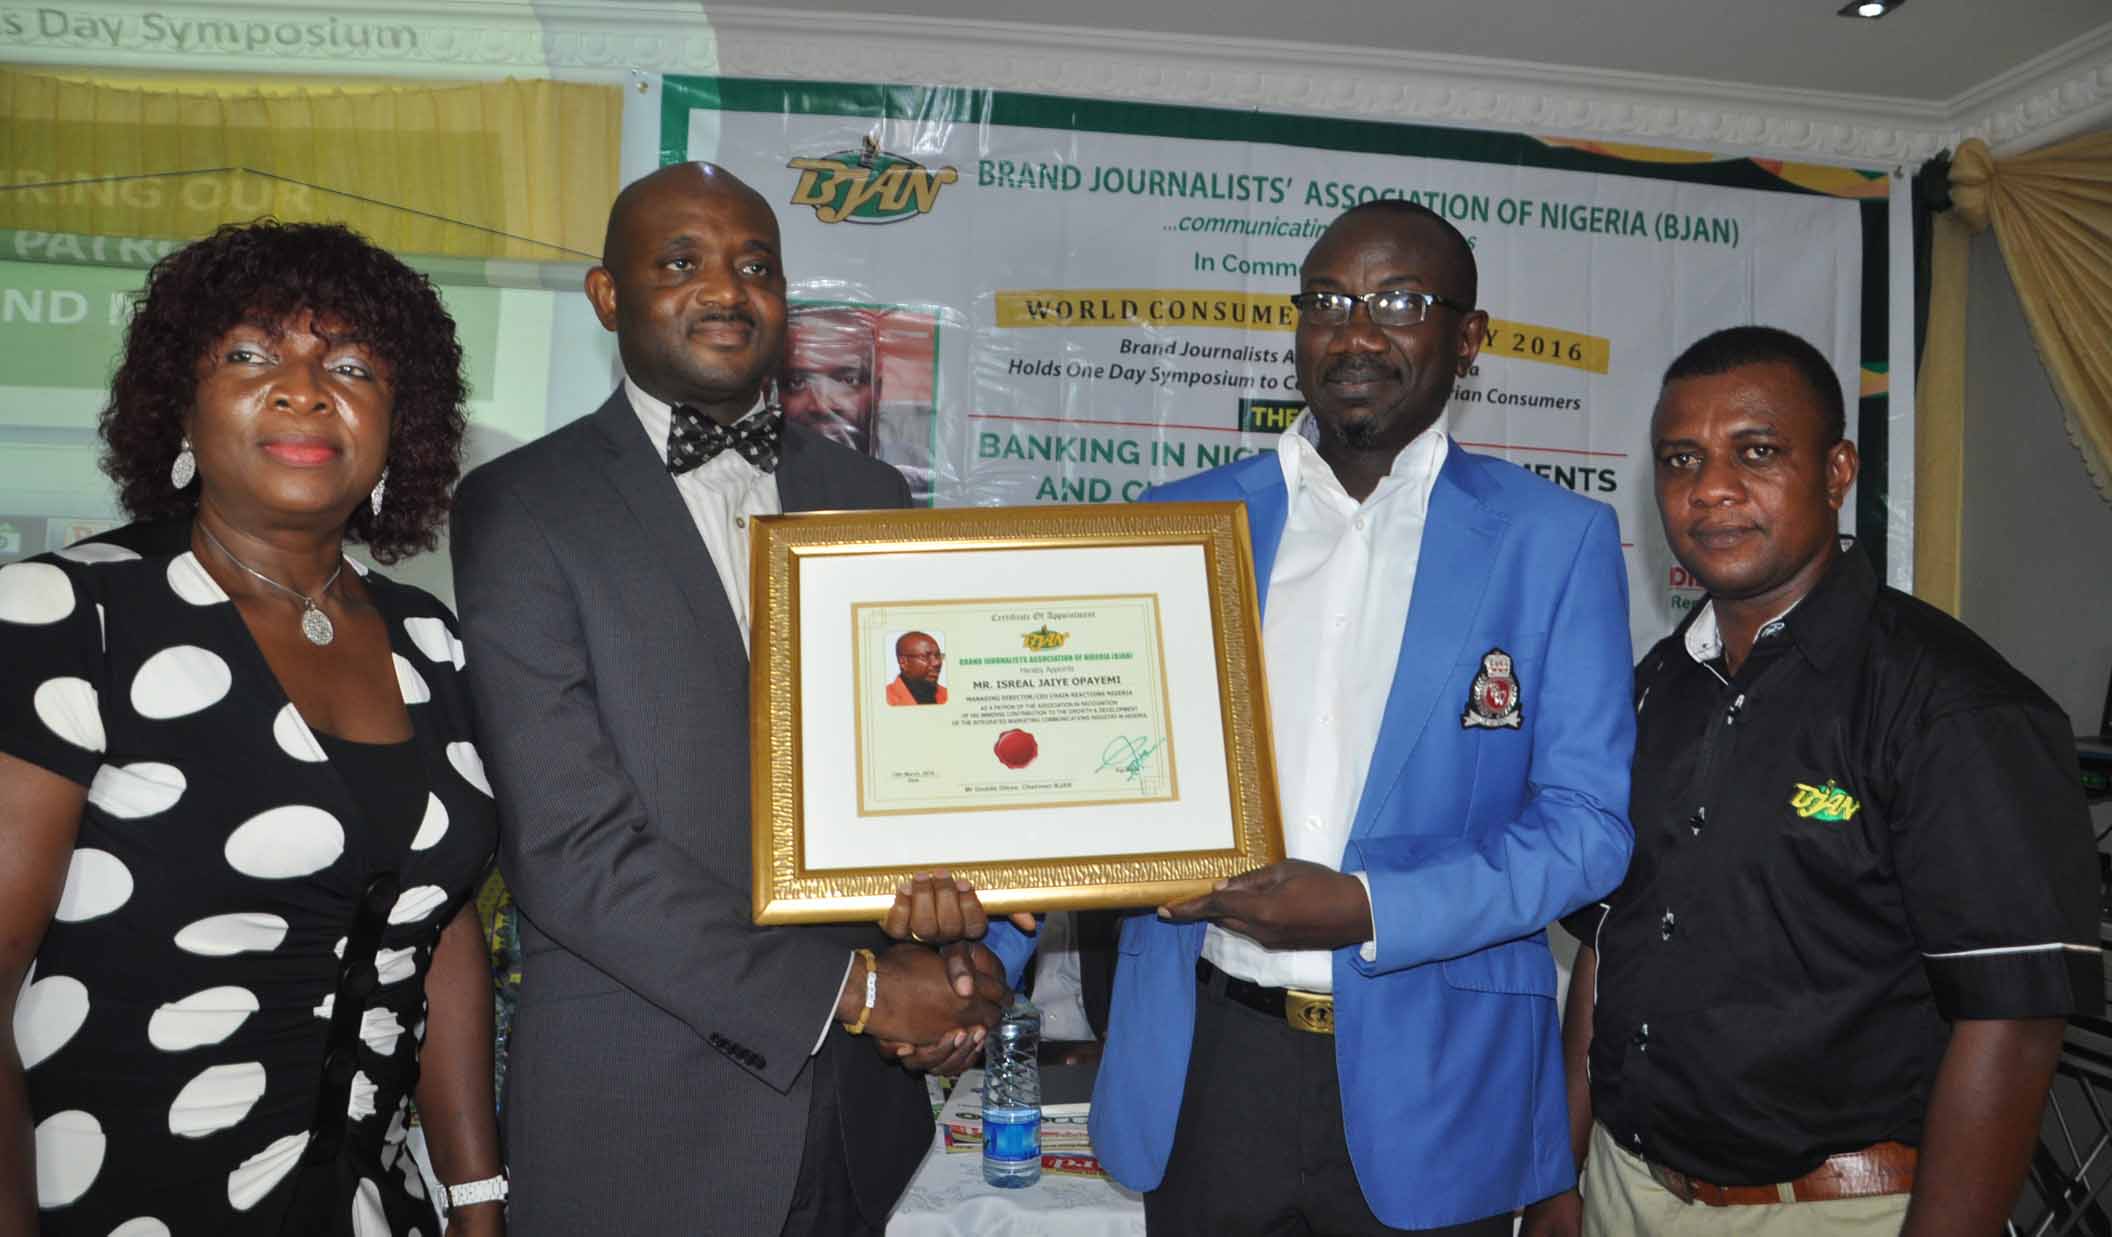  L-R: Mrs Neta Nwosu, former Chairman of BJAN, Mr. Celey Okogun, MD/CEO, Novel Potter presenting award to Mr. Isreal Jaiye Opayemi, MD/Chief Strategist, Chain Reactions Nigeria and Mr. Goddie Ofose, Chairman BJAN looks on at the 4th Brand Journalist Association of Nigeria (BJAN) Consumer Rights Day Symposium 2016, with the theme: Banking in Nigeria Developments and Customers Challenges held at White House Hotel GRA-Ikeja Lagos. 